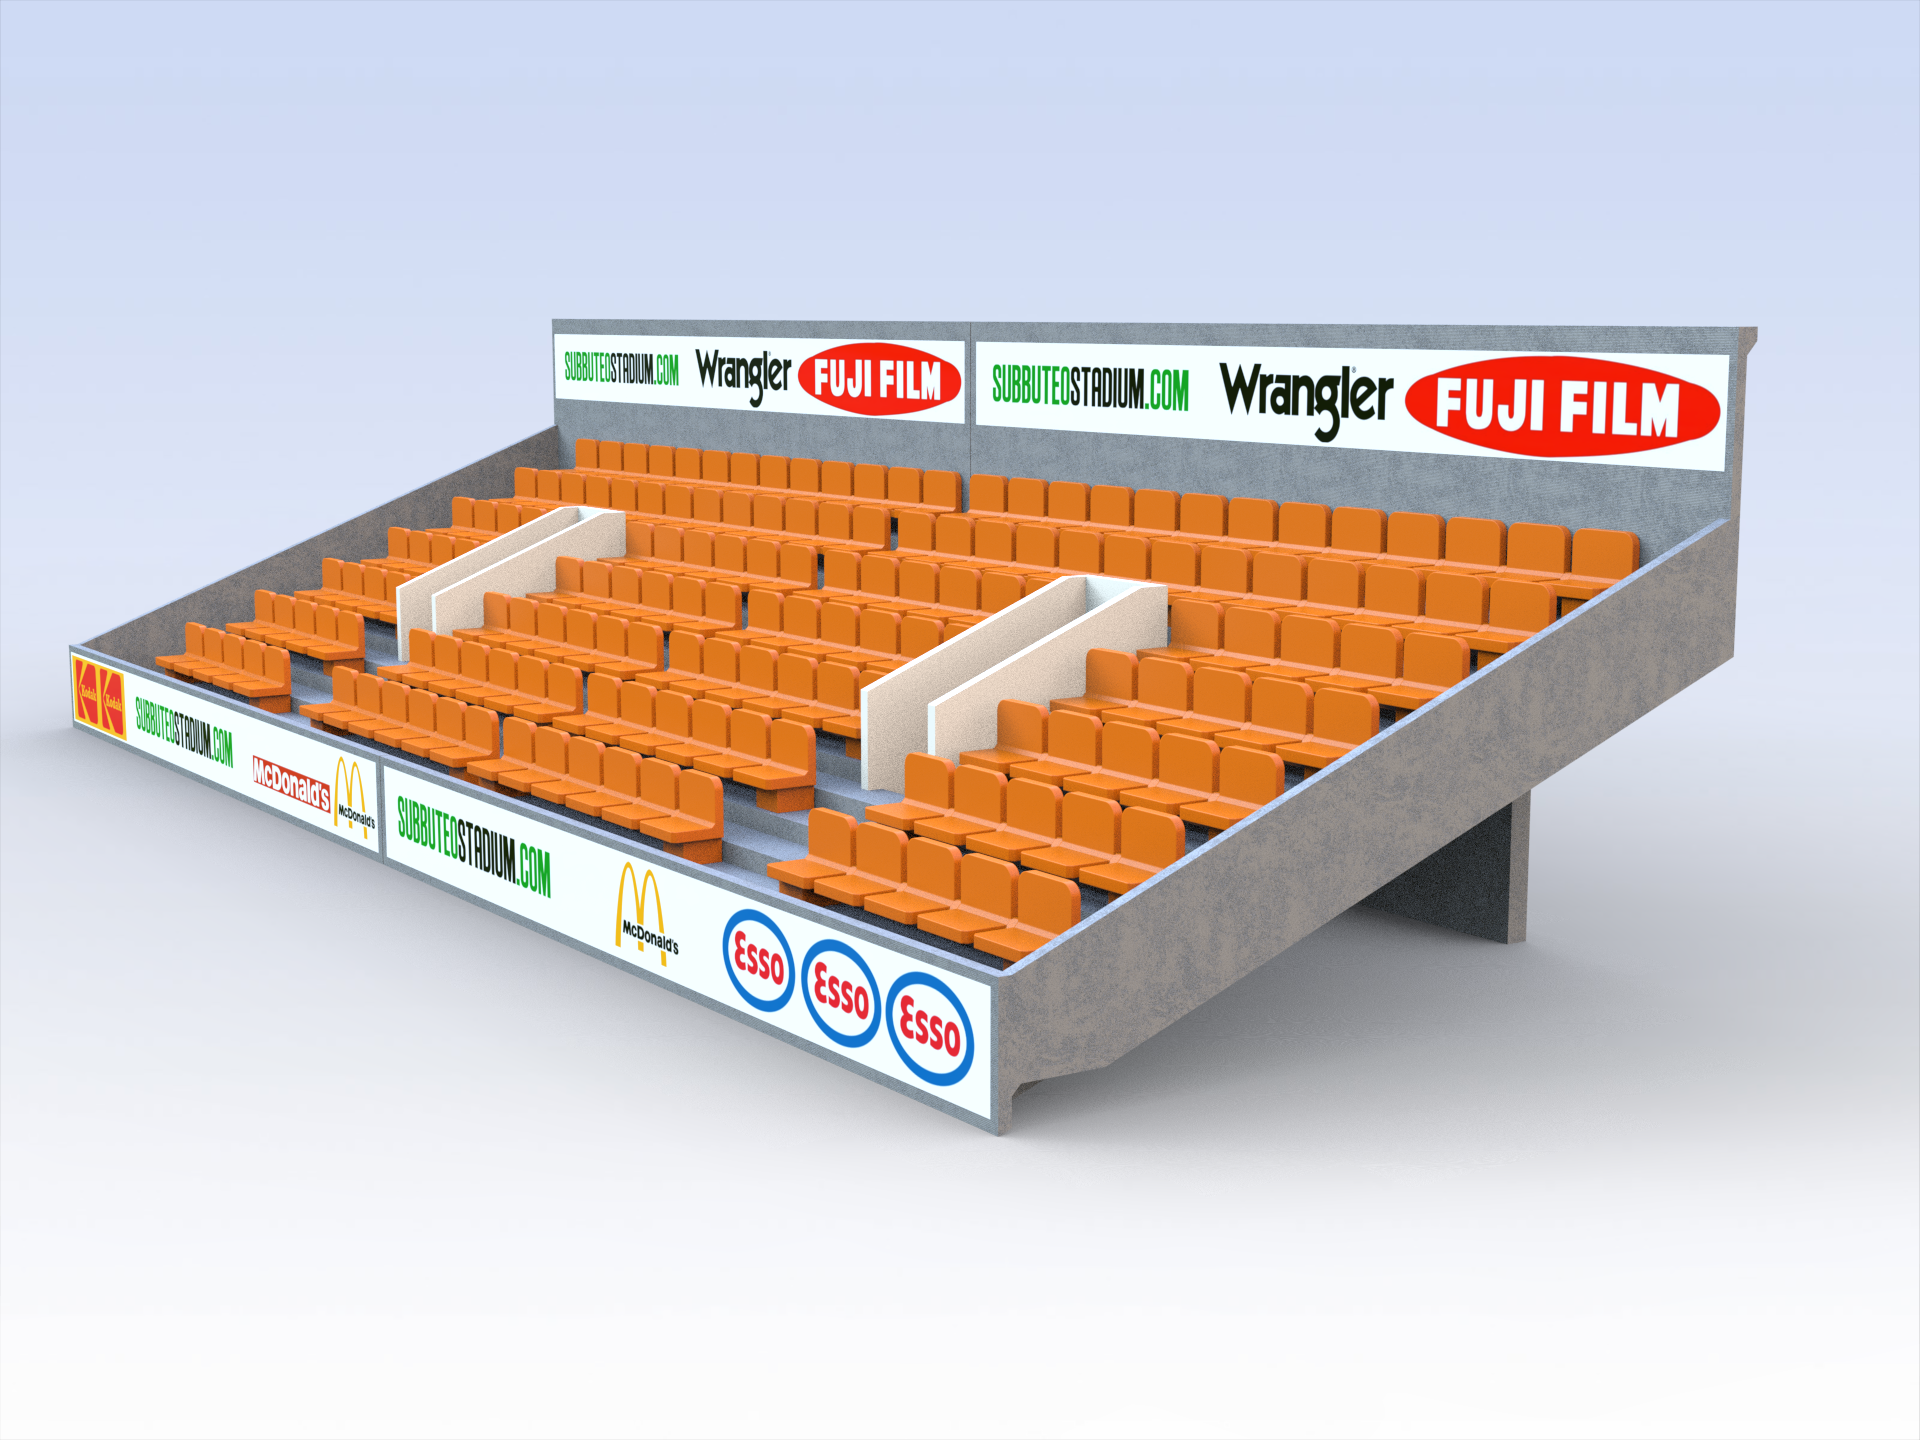 162 Seats for the Terrace T3®